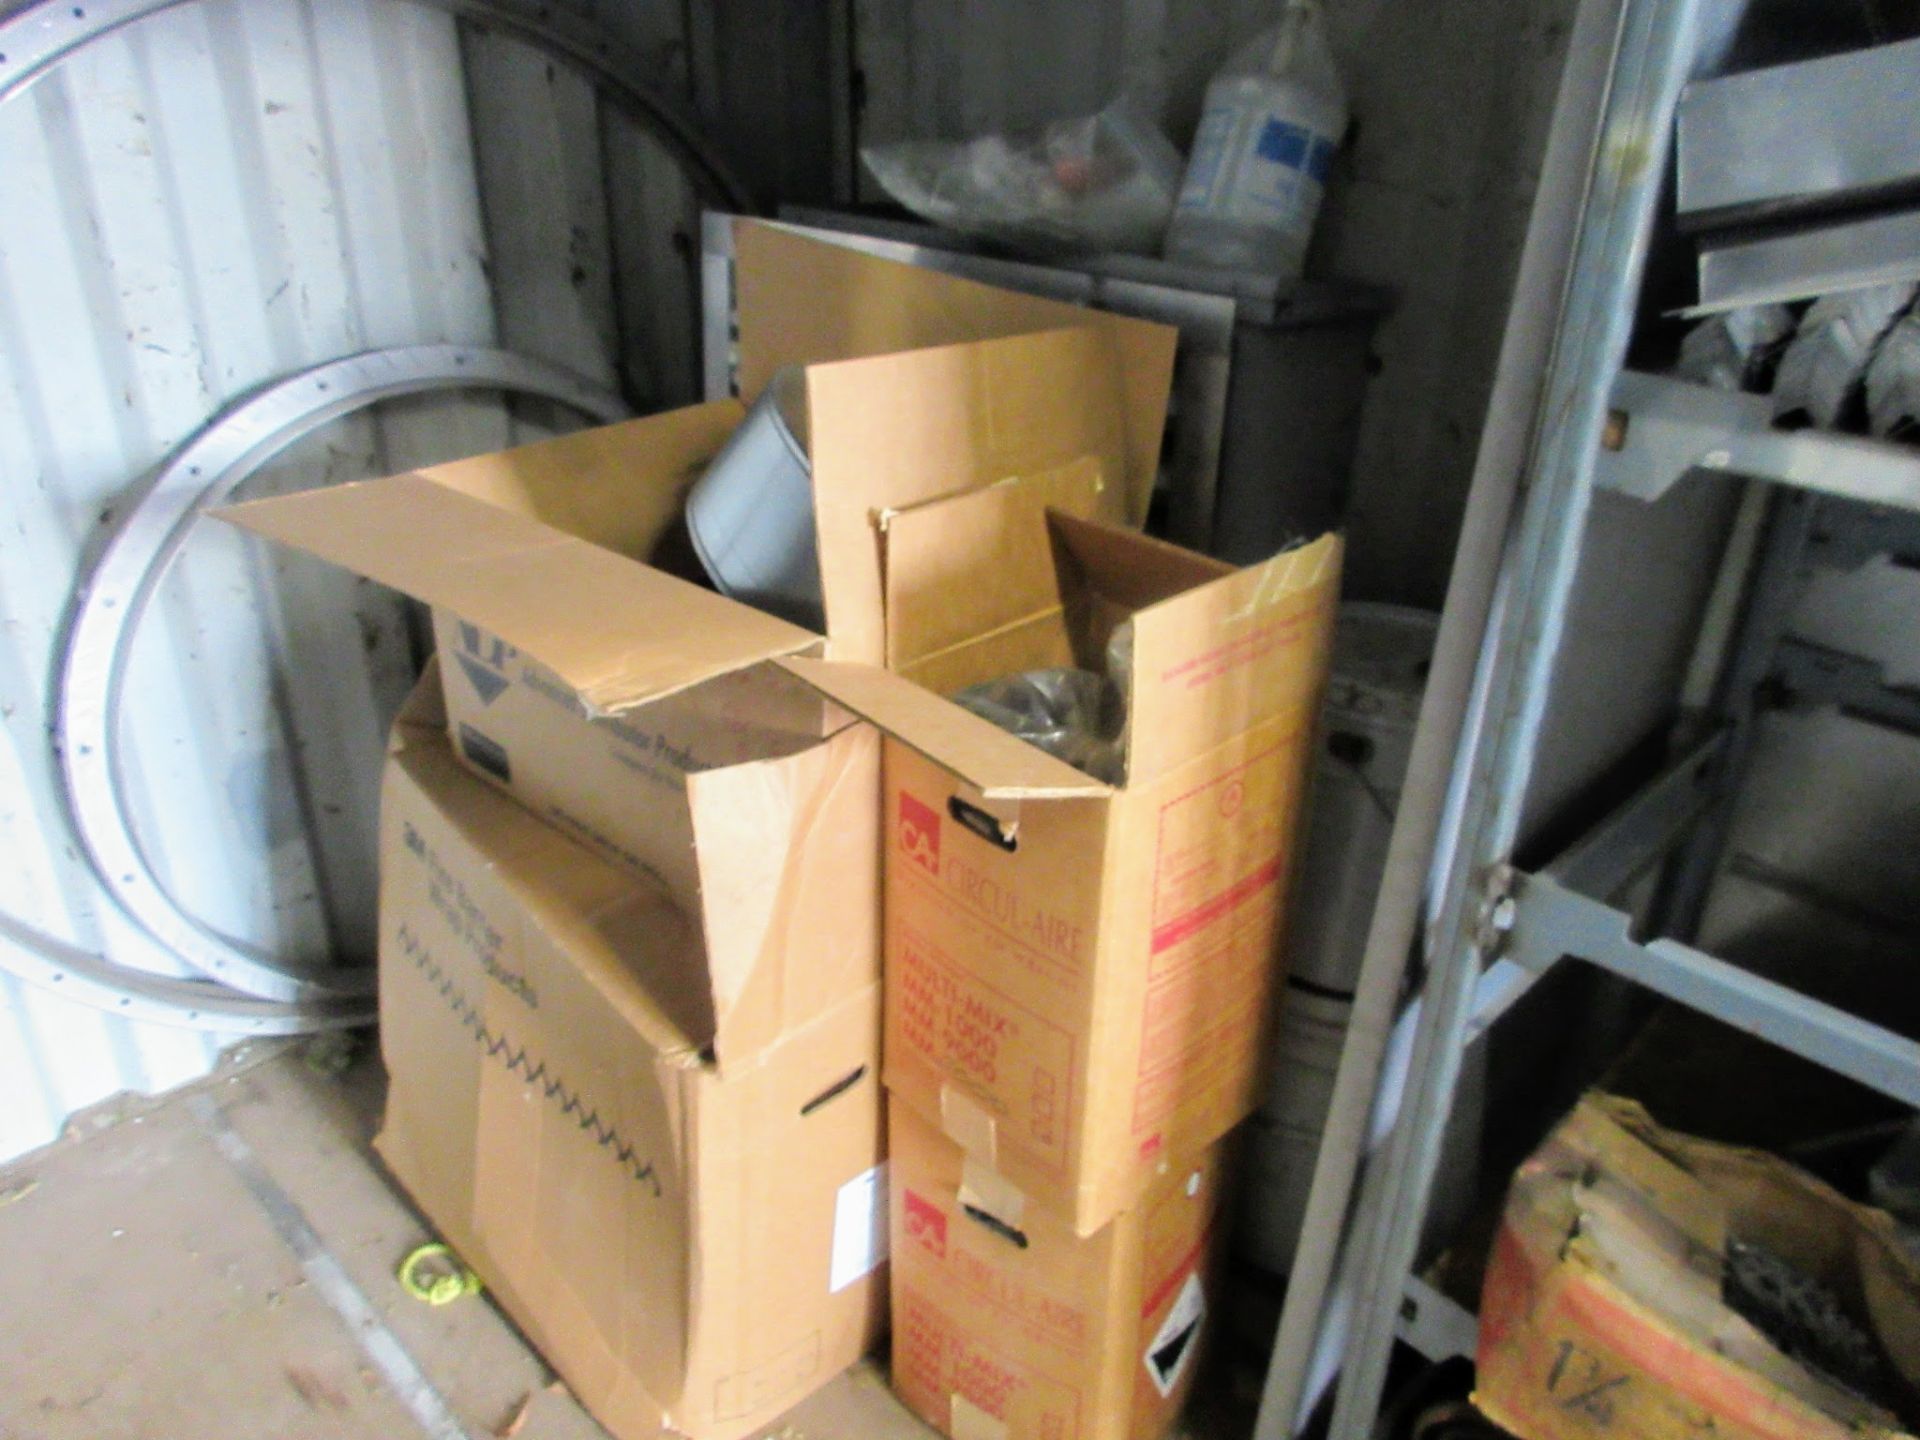 CONTENTS OF 20' SEACAN INCLUDING HVAC / DUCTWORK COMPONENTS, SUPPLIES, (4) U-LINE POSTS, ETC. - Image 5 of 11